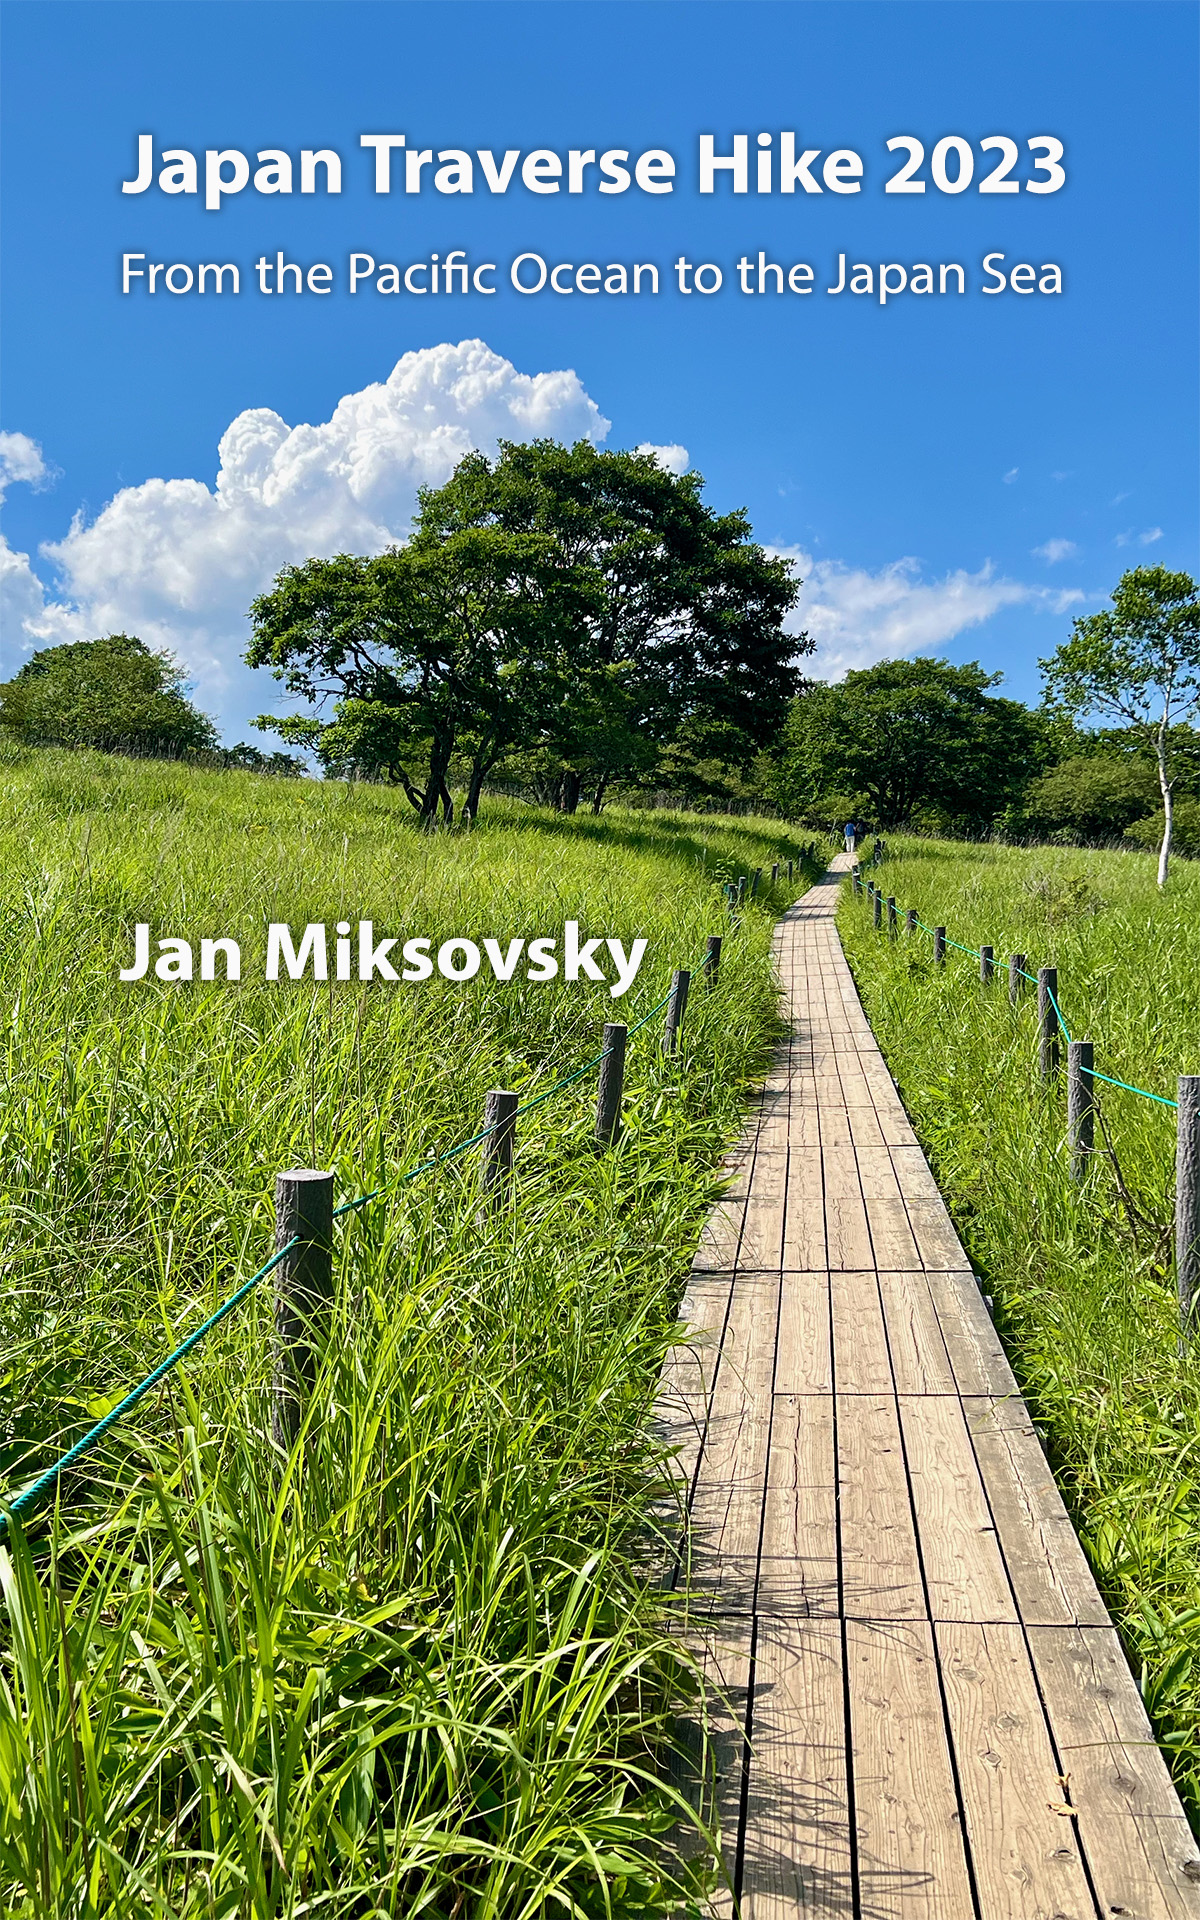 Book cover showing a grassy meadow with an elevated wooden pathway